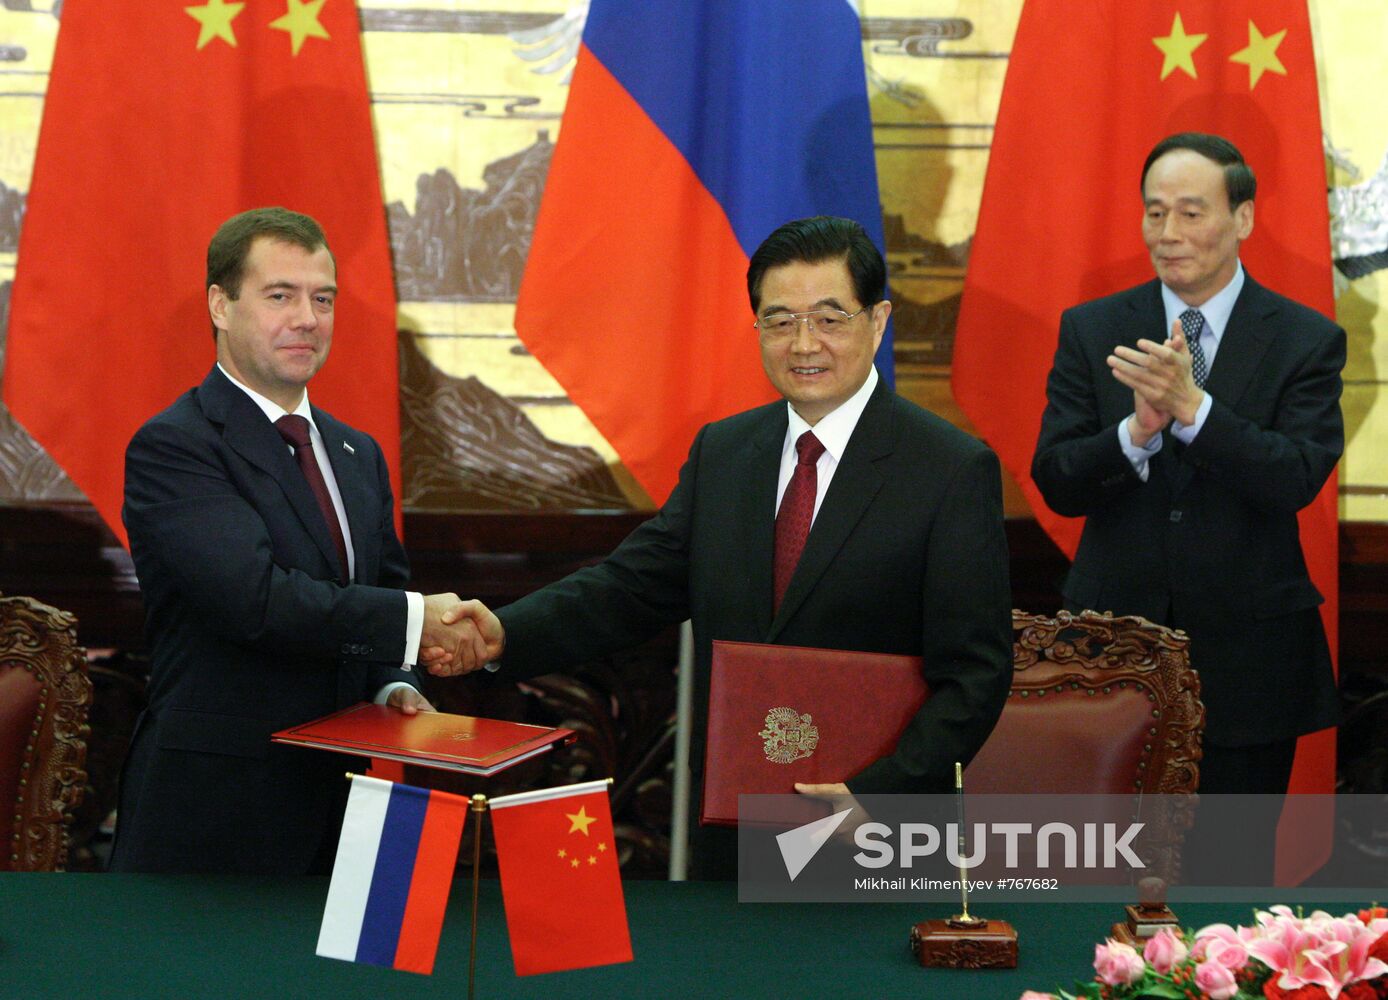 President Medvedev's official visit to China. Day Two